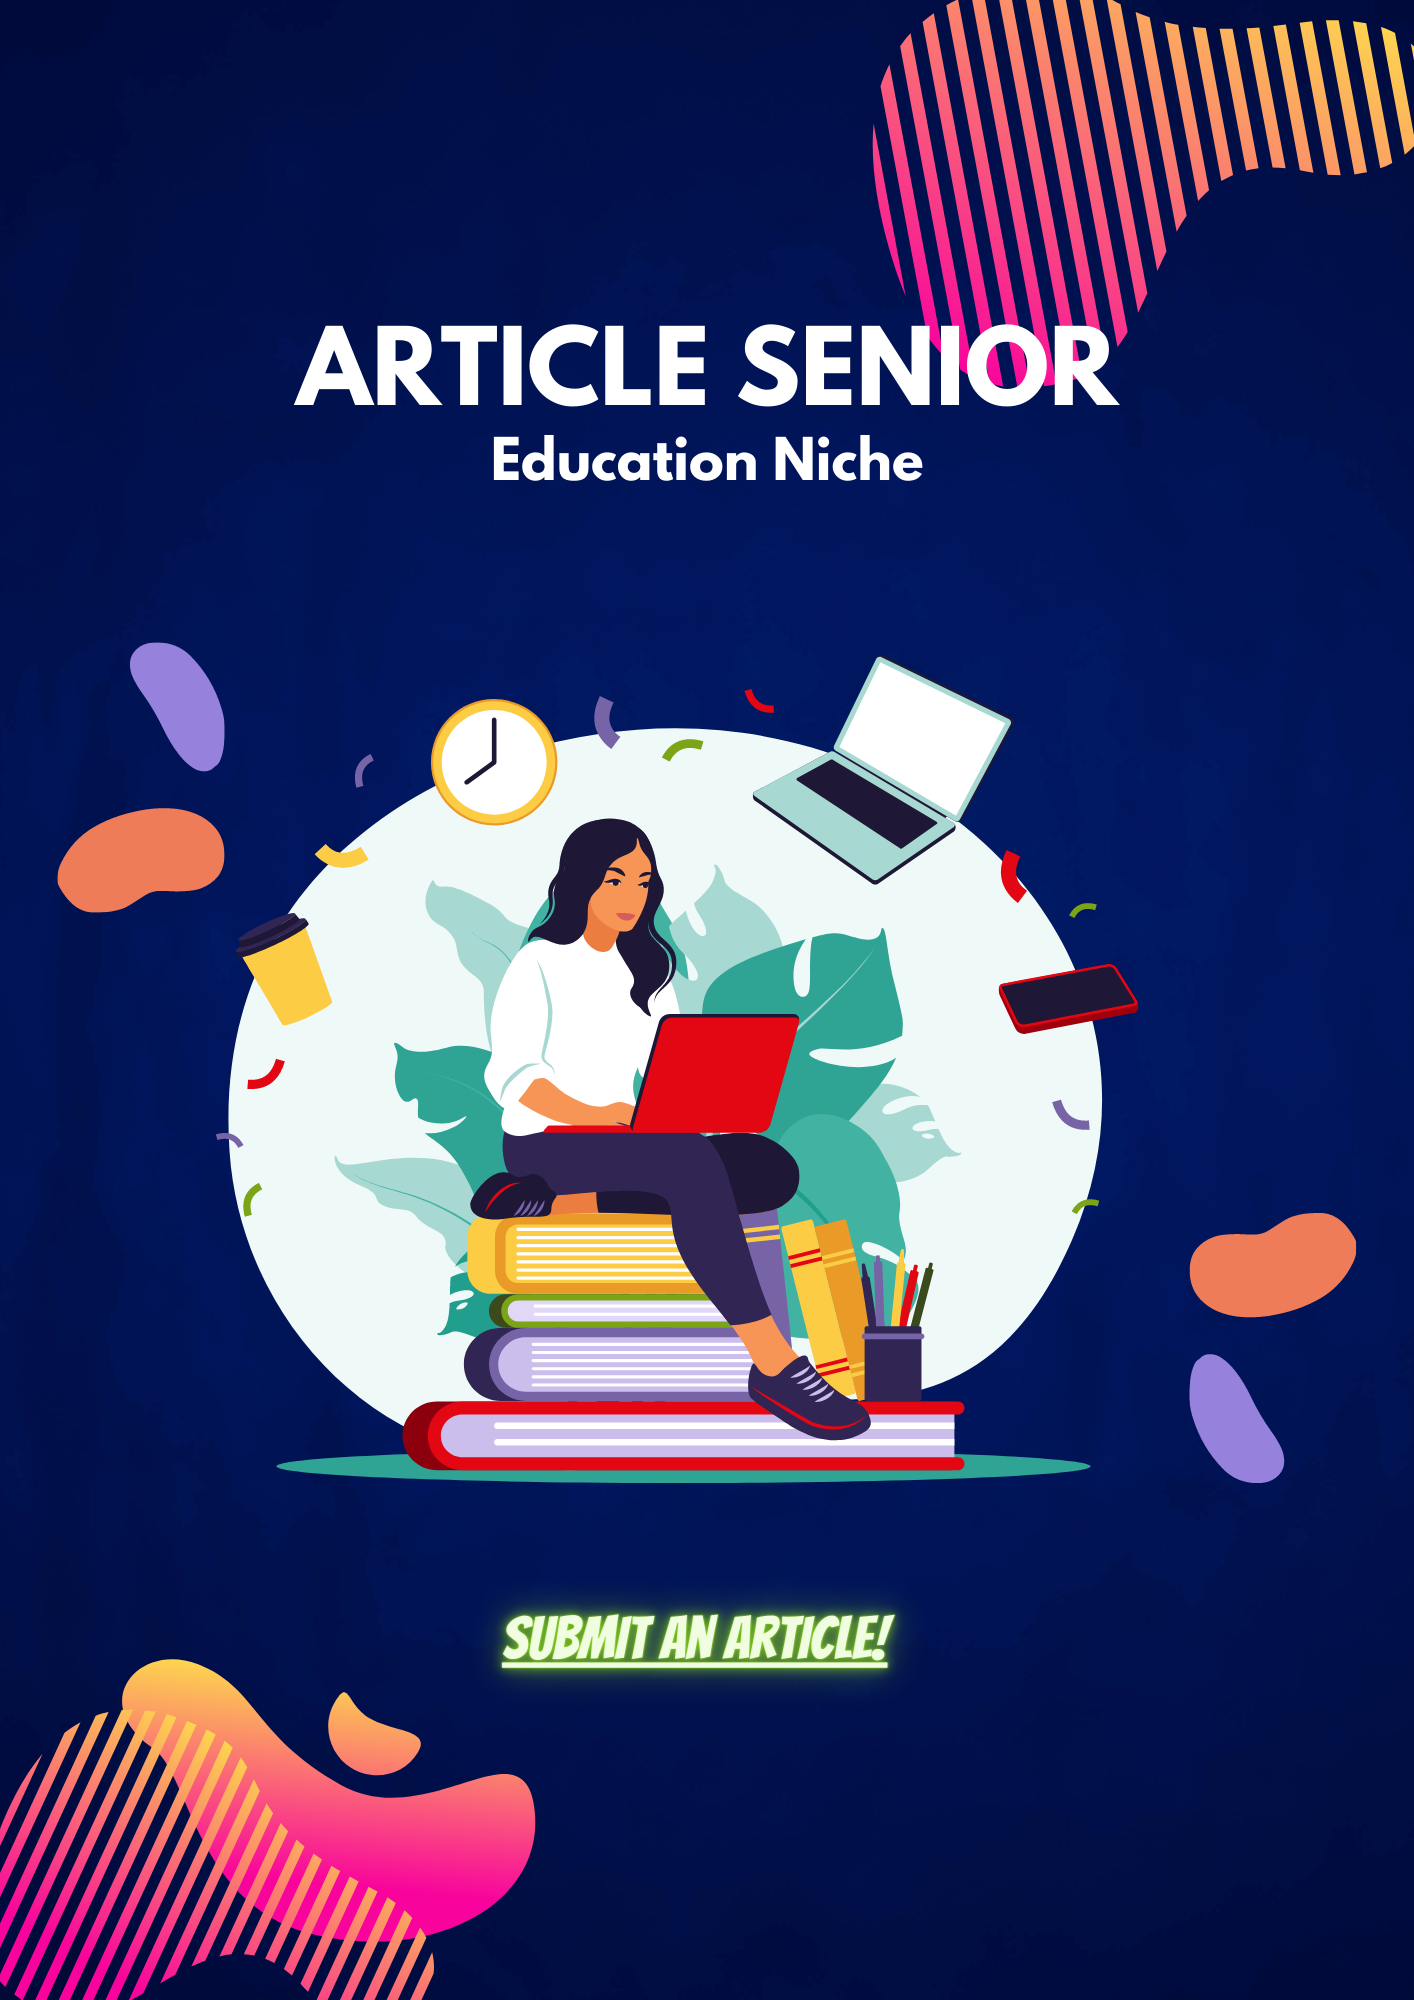 Article Senior - Submit an article